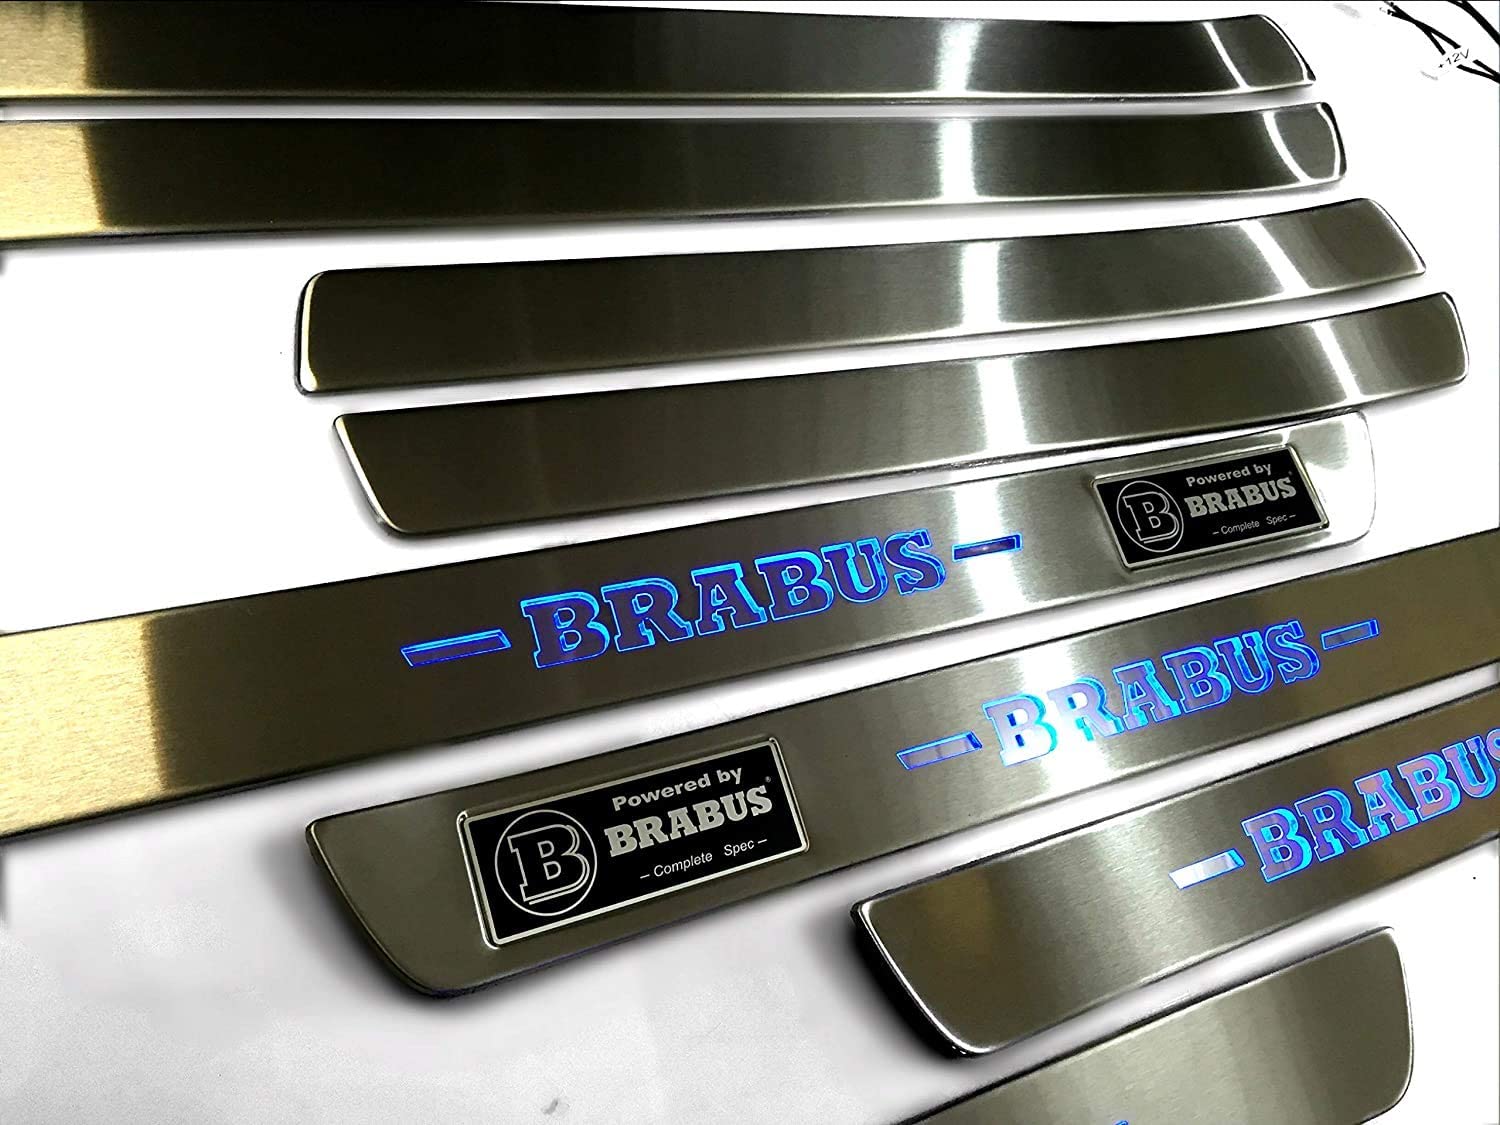 Mercedes-Benz Compatible with Powered by Brabus W222 S222 S63 S500 S550 S65 S Class Entrance mouldings LED Illuminated Door Sills Interior Trim Set 8 pcs Stainless Steel Polished Chrome Blue Sign